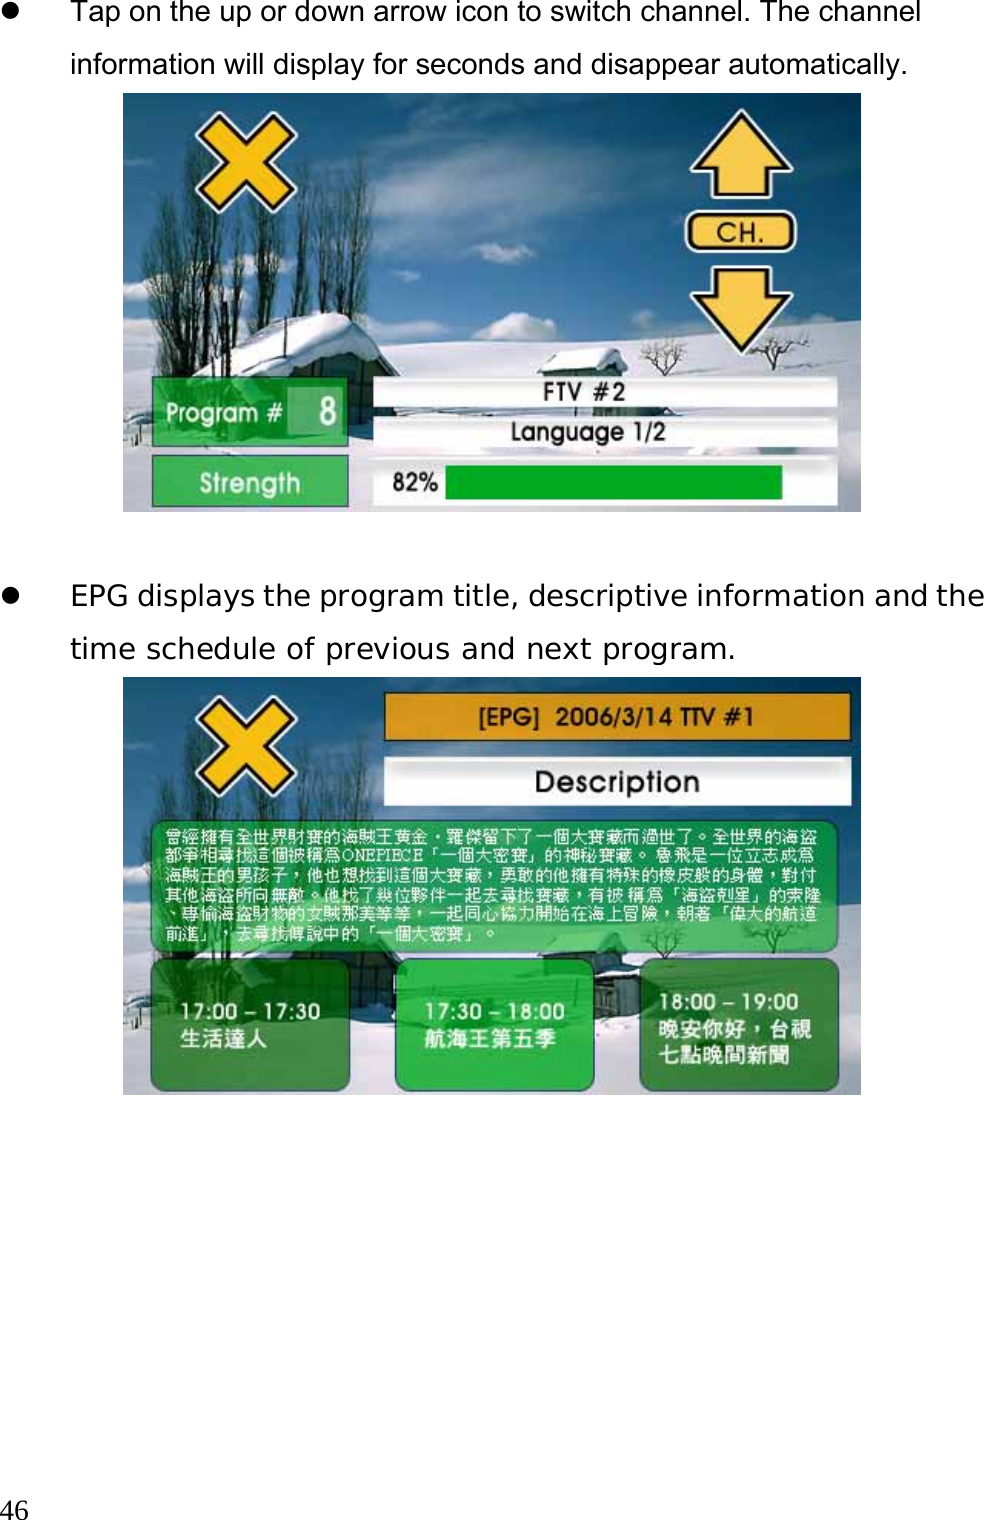  46  z  Tap on the up or down arrow icon to switch channel. The channel information will display for seconds and disappear automatically.     z EPG displays the program title, descriptive information and the time schedule of previous and next program.    